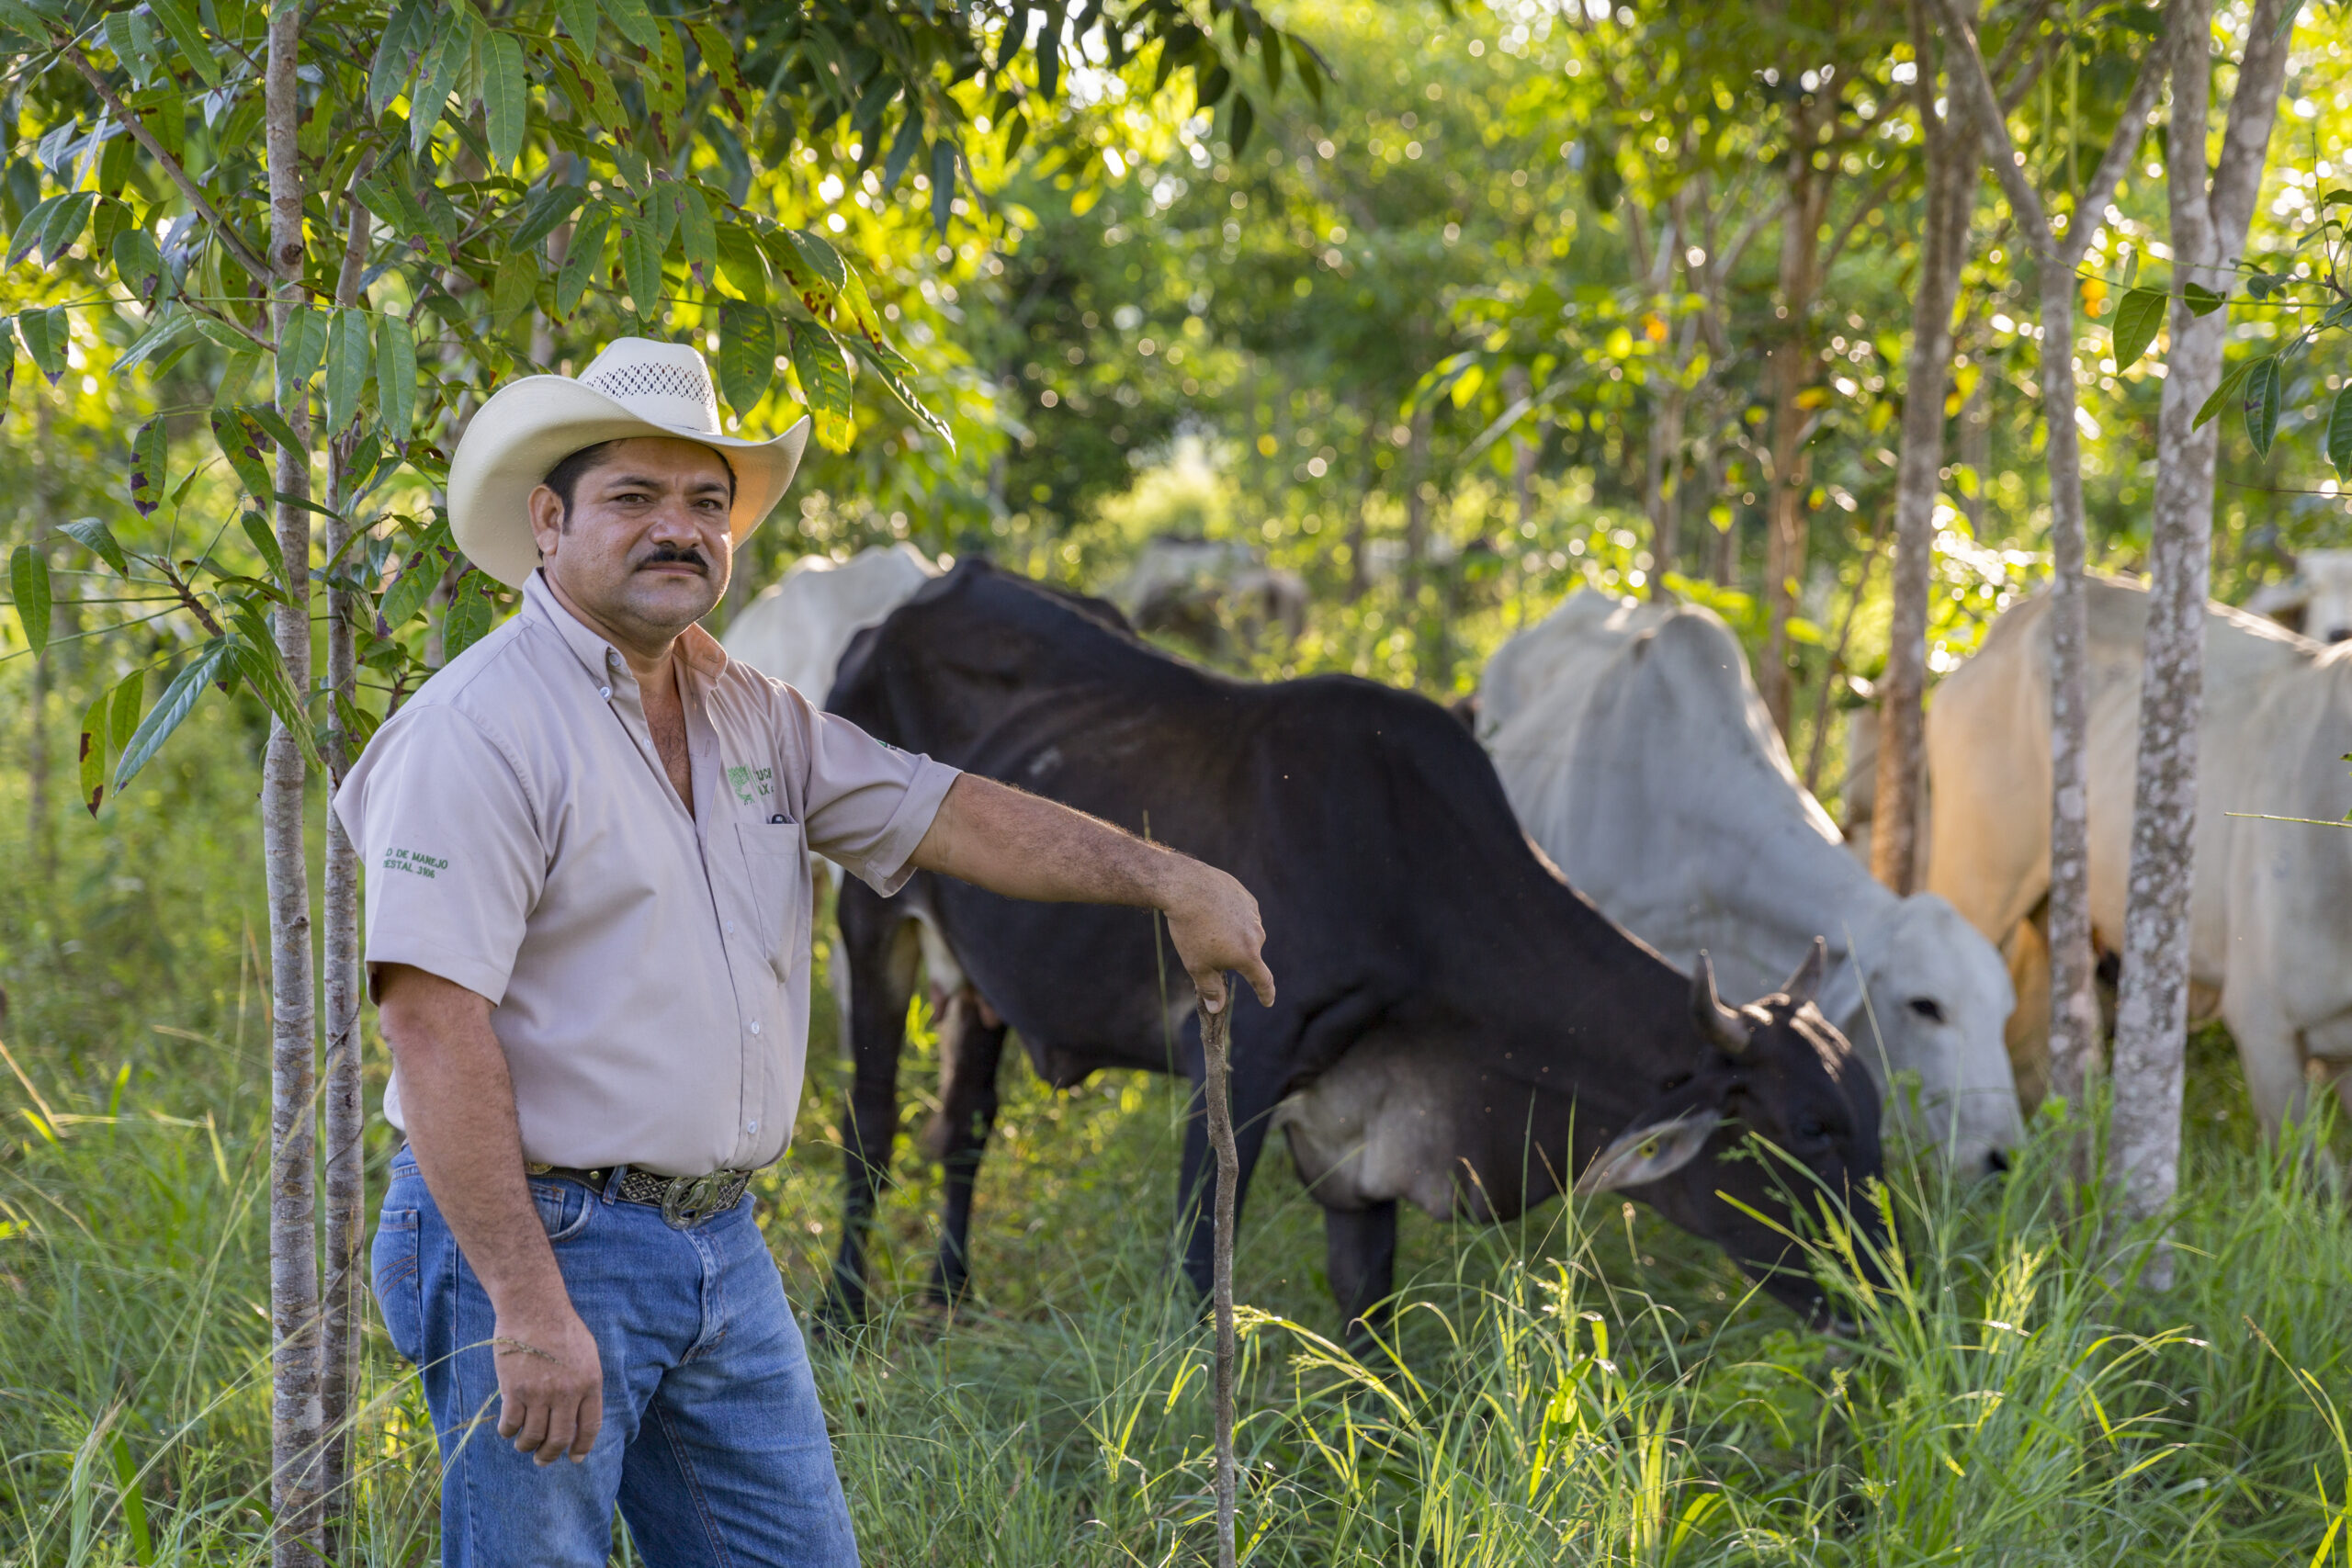 (TNC LICENSE) October 2016. Rancher Jose Palomo stands under the shade trees in his "silvopastoral" pasture at his ranch Los Potrillos in Becanchen, Yucatan. Palomo has adopted "silvopastoral" ranching practices, which increases cattle yields through a mixed grass/shrub/tree ecosystem. The shade lessens stress of tropical sun and helps cattle gain and keep weight. The Nature Conservancy works with landowners, communities, and governments in Mexico to promote low-carbon rural development through the design and implementation of improved policy and practice in agriculture, ranching, and forestry. The Conservancy is leading the initiative, Mexico REDD+ Program in conjunction with the Rainforest Alliance, the Woods Hole Research Center, and Espacios Naturales y Desarrollo Sustentable. Photo credit: © Erich Schlegel